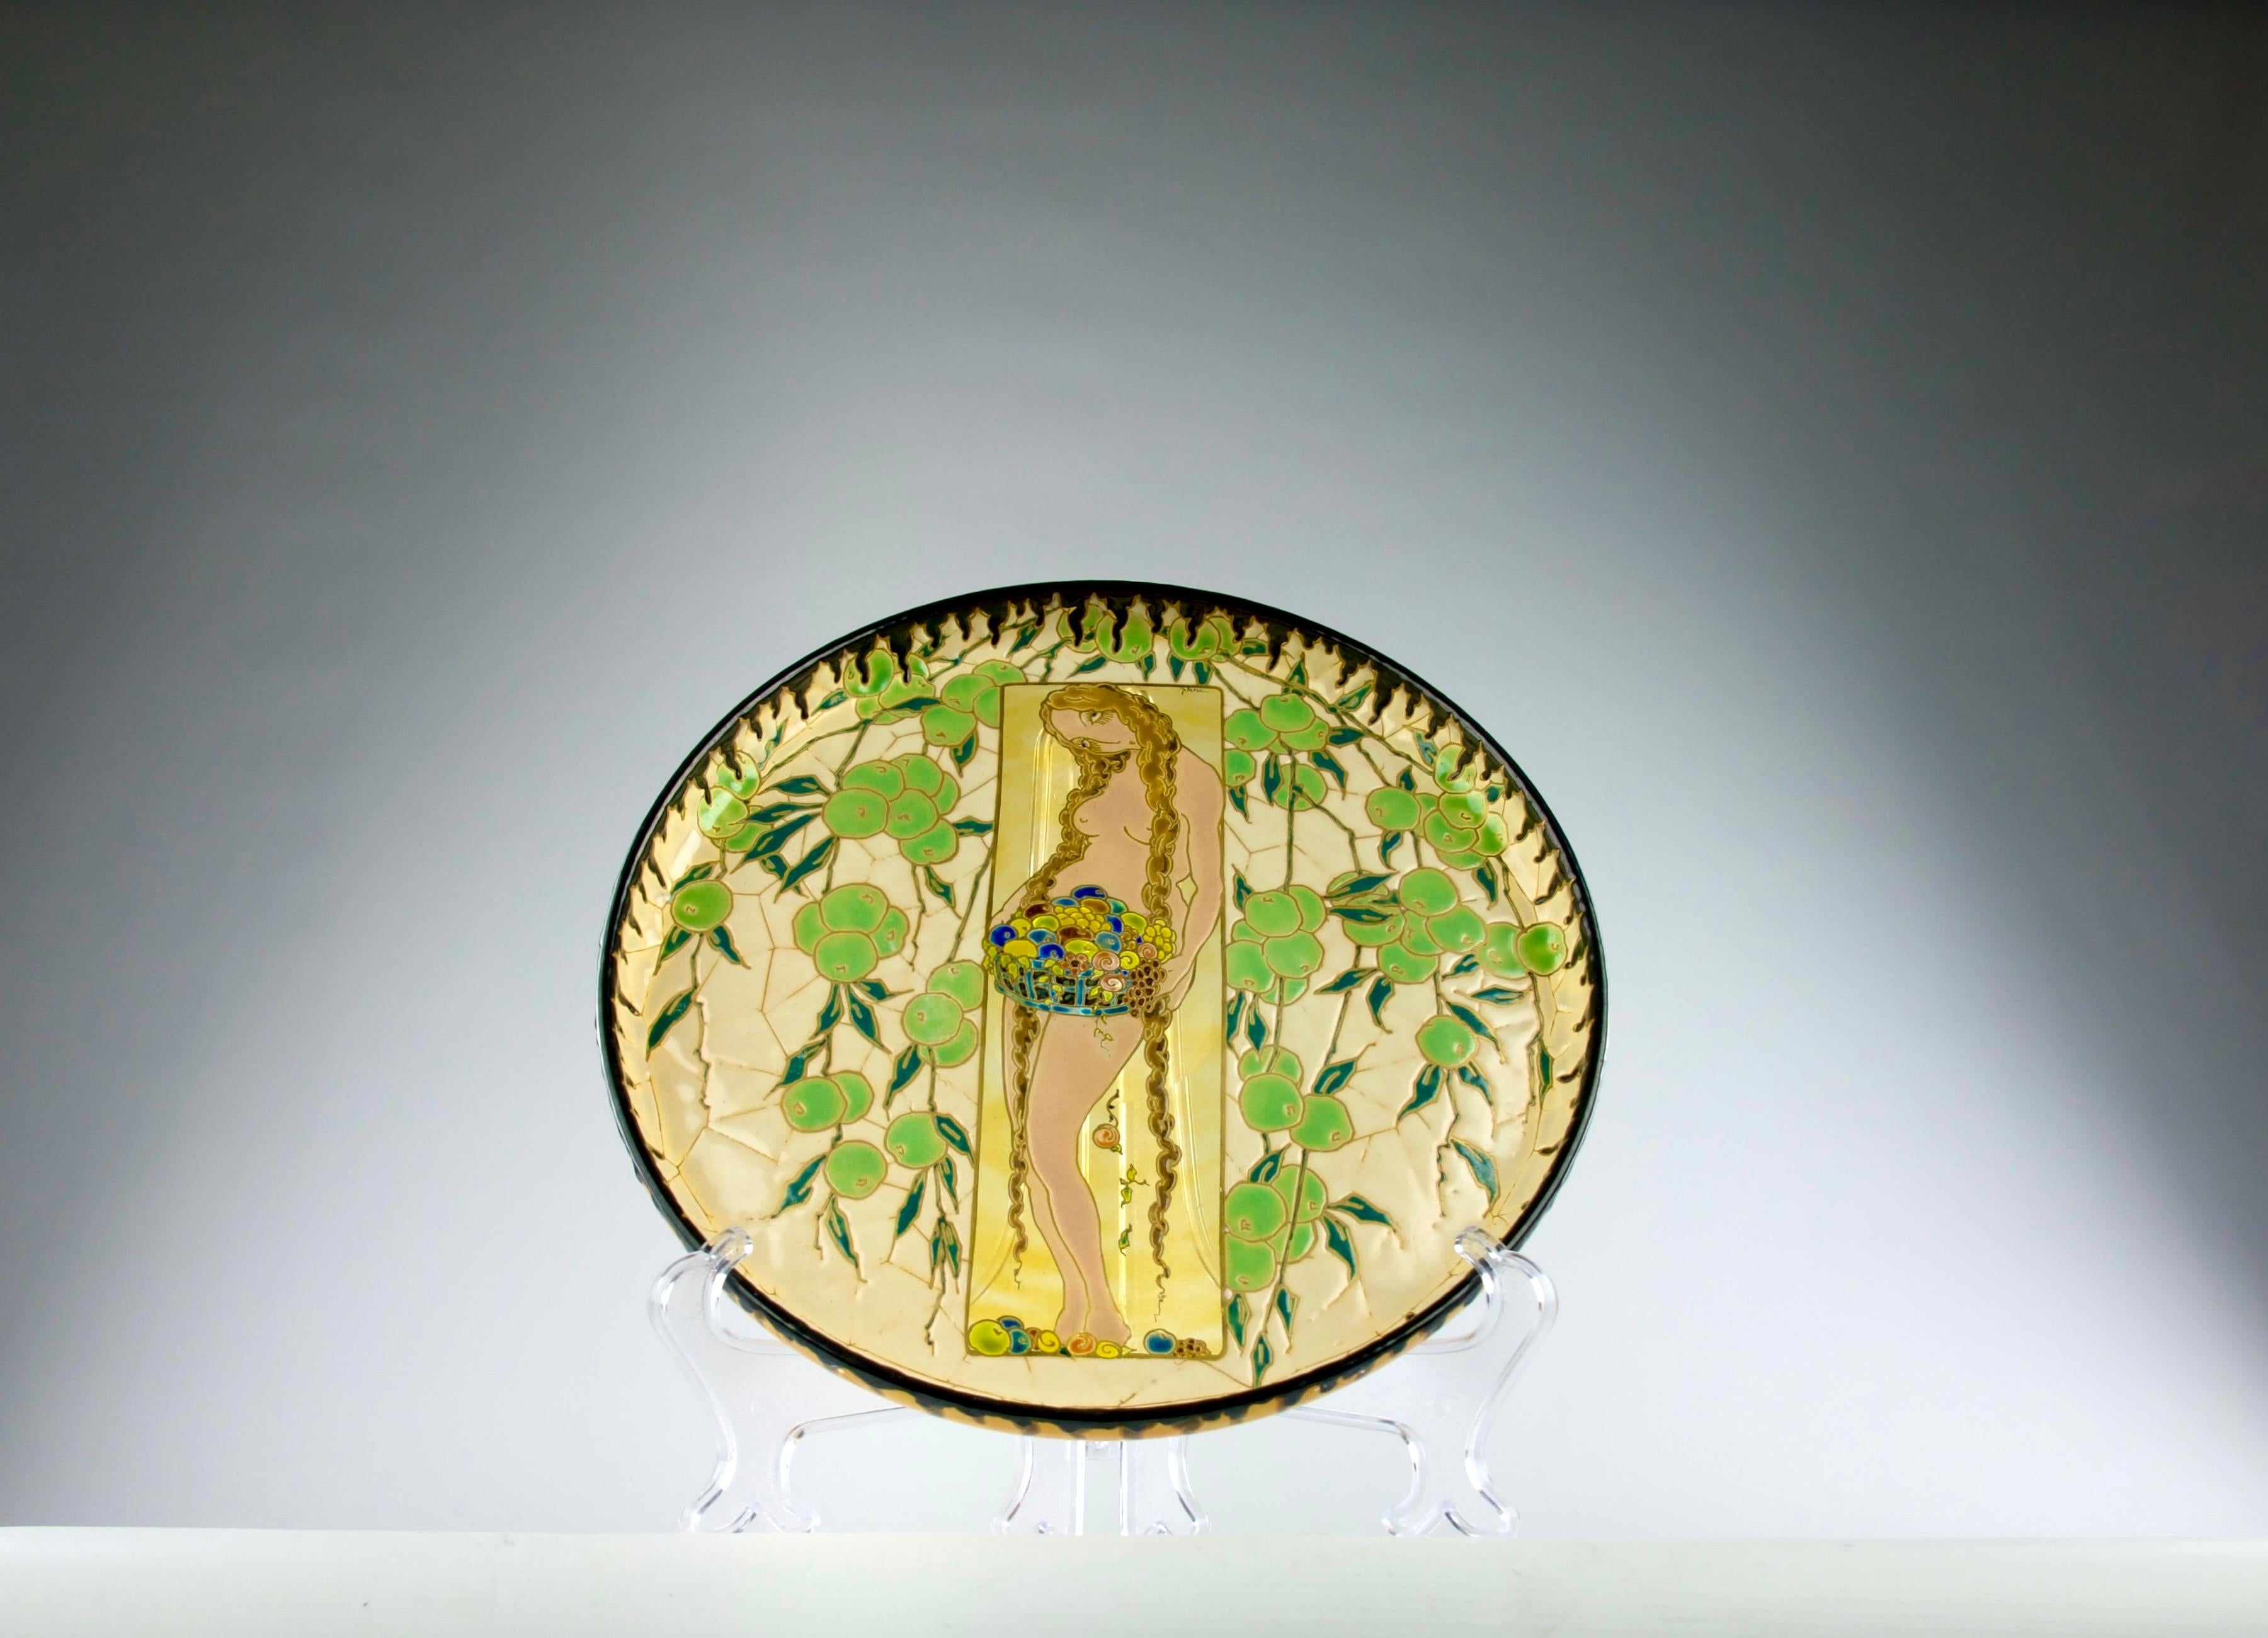 Beautiful and extremely rare signed and inscribed enamelled glass plate artwork by Nicolas Platon Argyriades (1888-1968). Representation of a woman in nude carrying a bowl of offerings and surrounded by fruits. Signed Platon in the front and